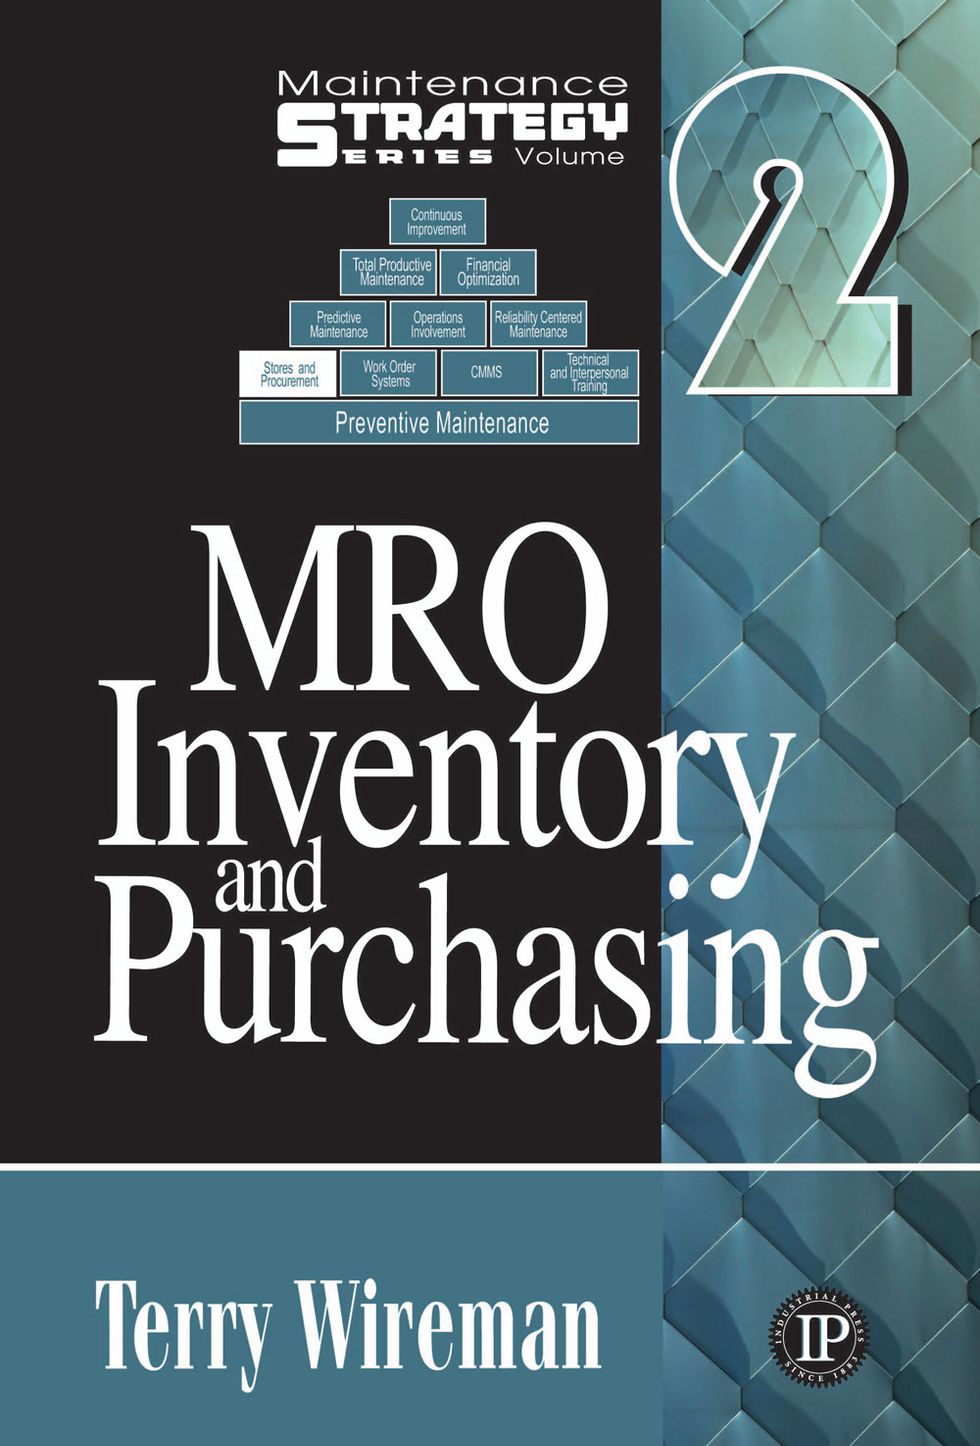  Maintenance Strategy Series Volume 2 - MRO Inventory and Purchasing 